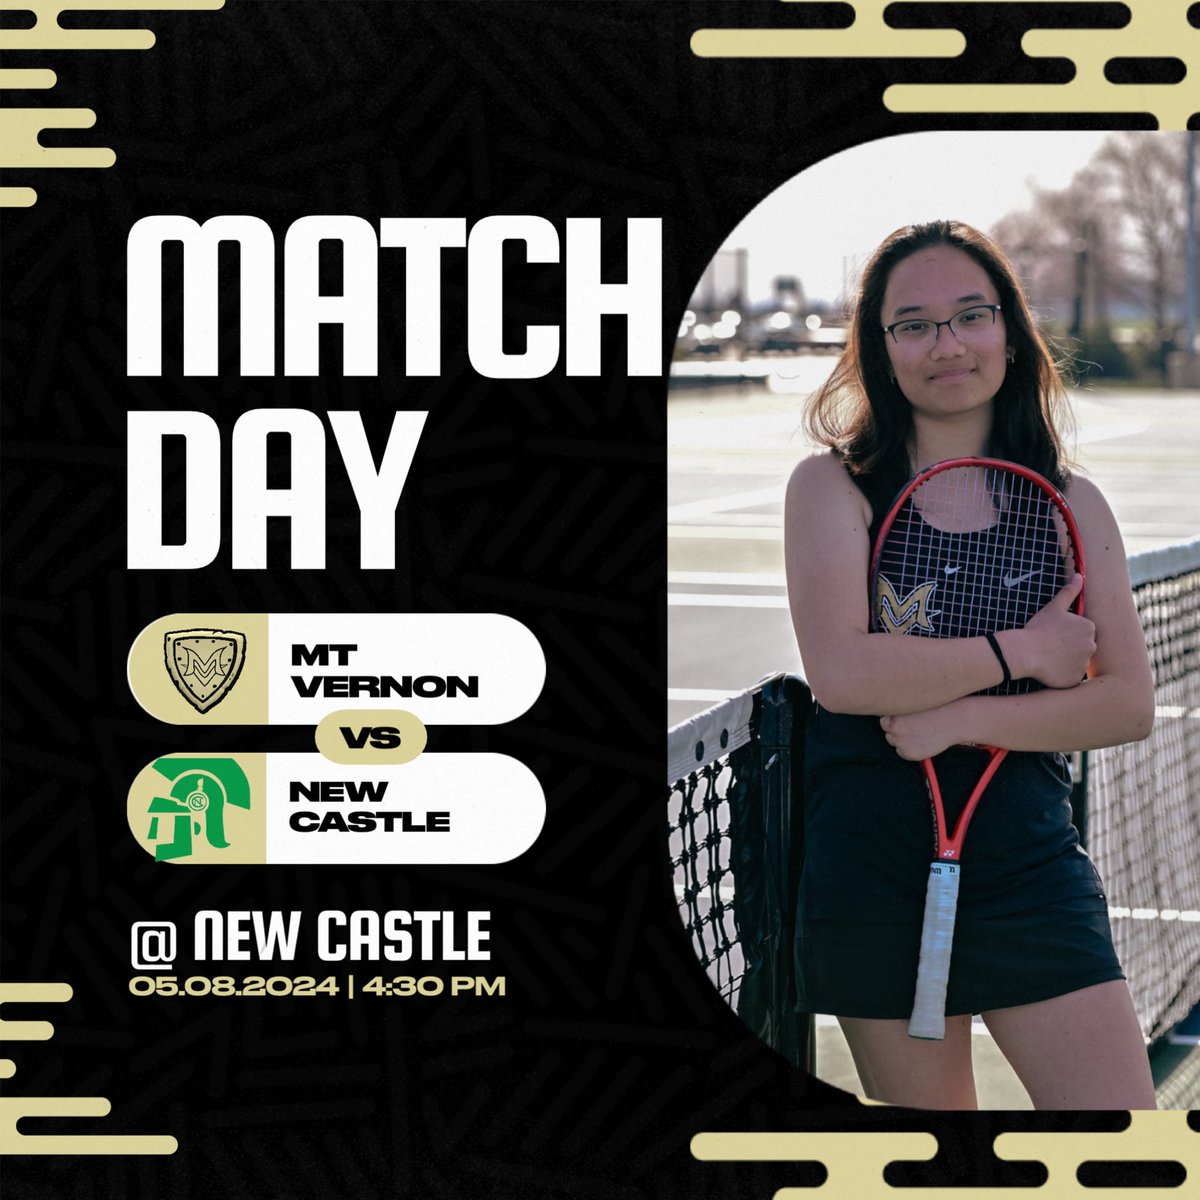 It’s #MatchDay

The Marauders have a chance to make history tonight with a win to hold the HHC title for both Boys and Girls Tennis in the same year! 

🎾 >> Girls Tennis
🆚 >> New Castle
📍 >> New Castle High School
⏰ >> 4:30pm